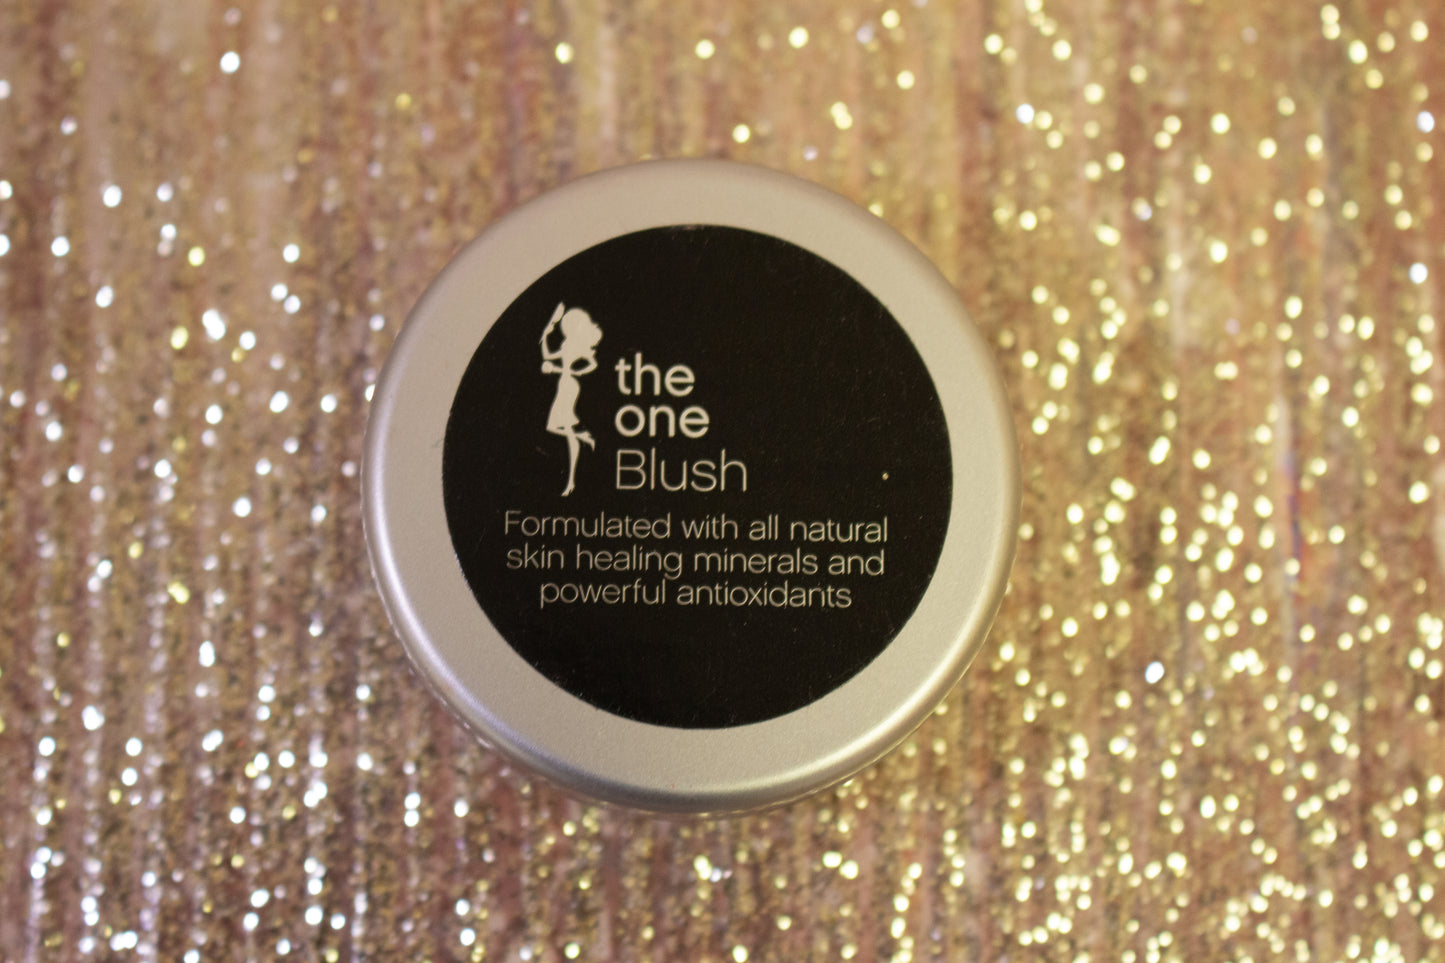 The One Blush